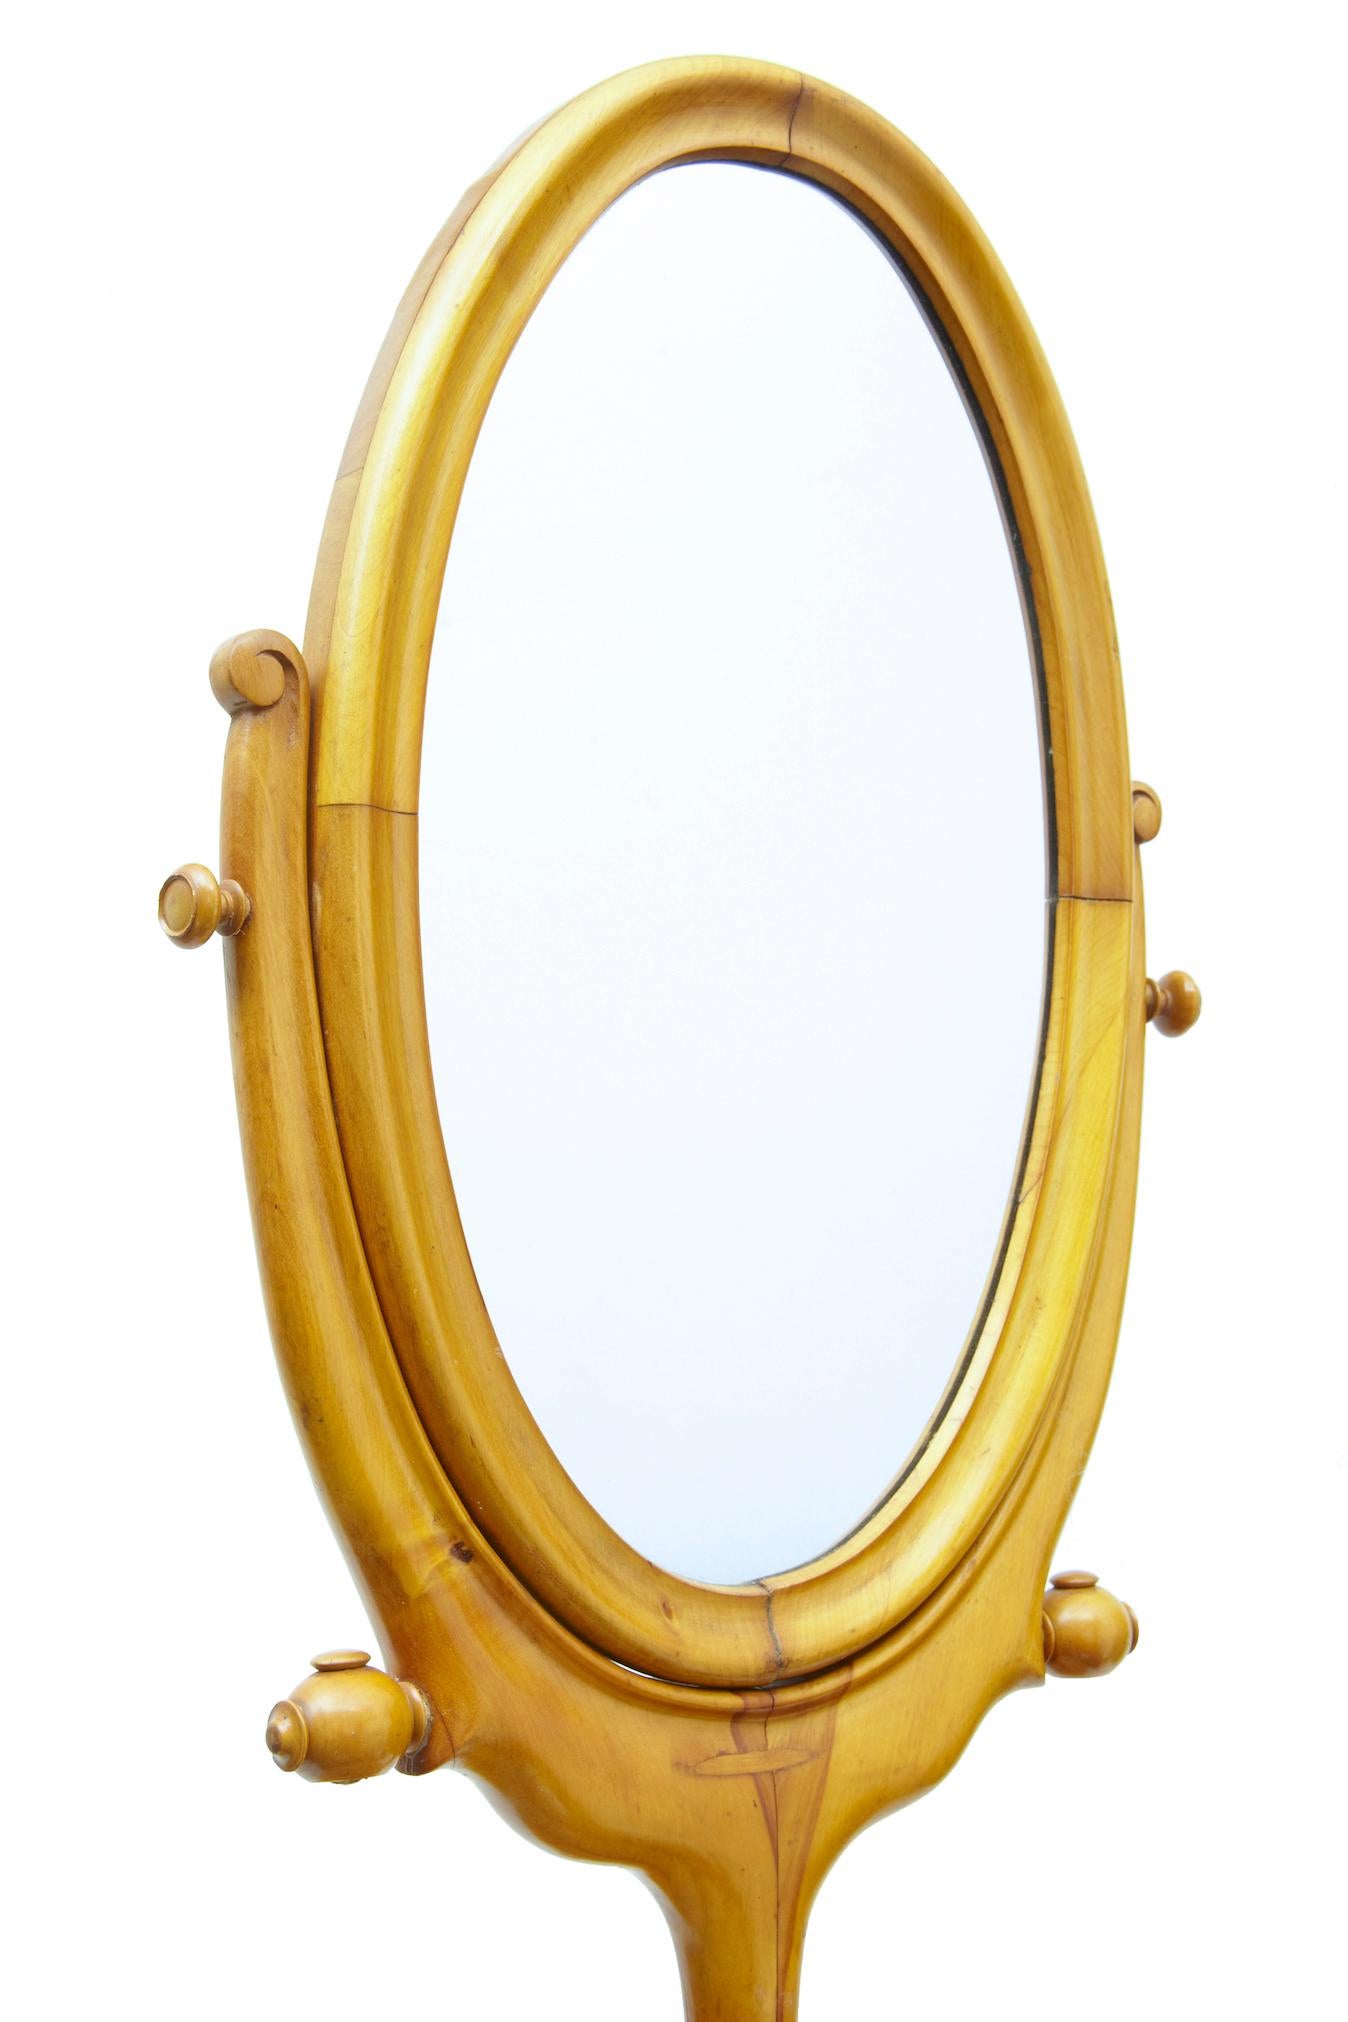 Late 19th century Scandinavian birch shaving mirror stand, circa 1890.

Unusual piece which would be ideal for use as a shop fitment or for the home. Oval mirror with tilting capabilities and height adjustment. Mirror links to a circular top with